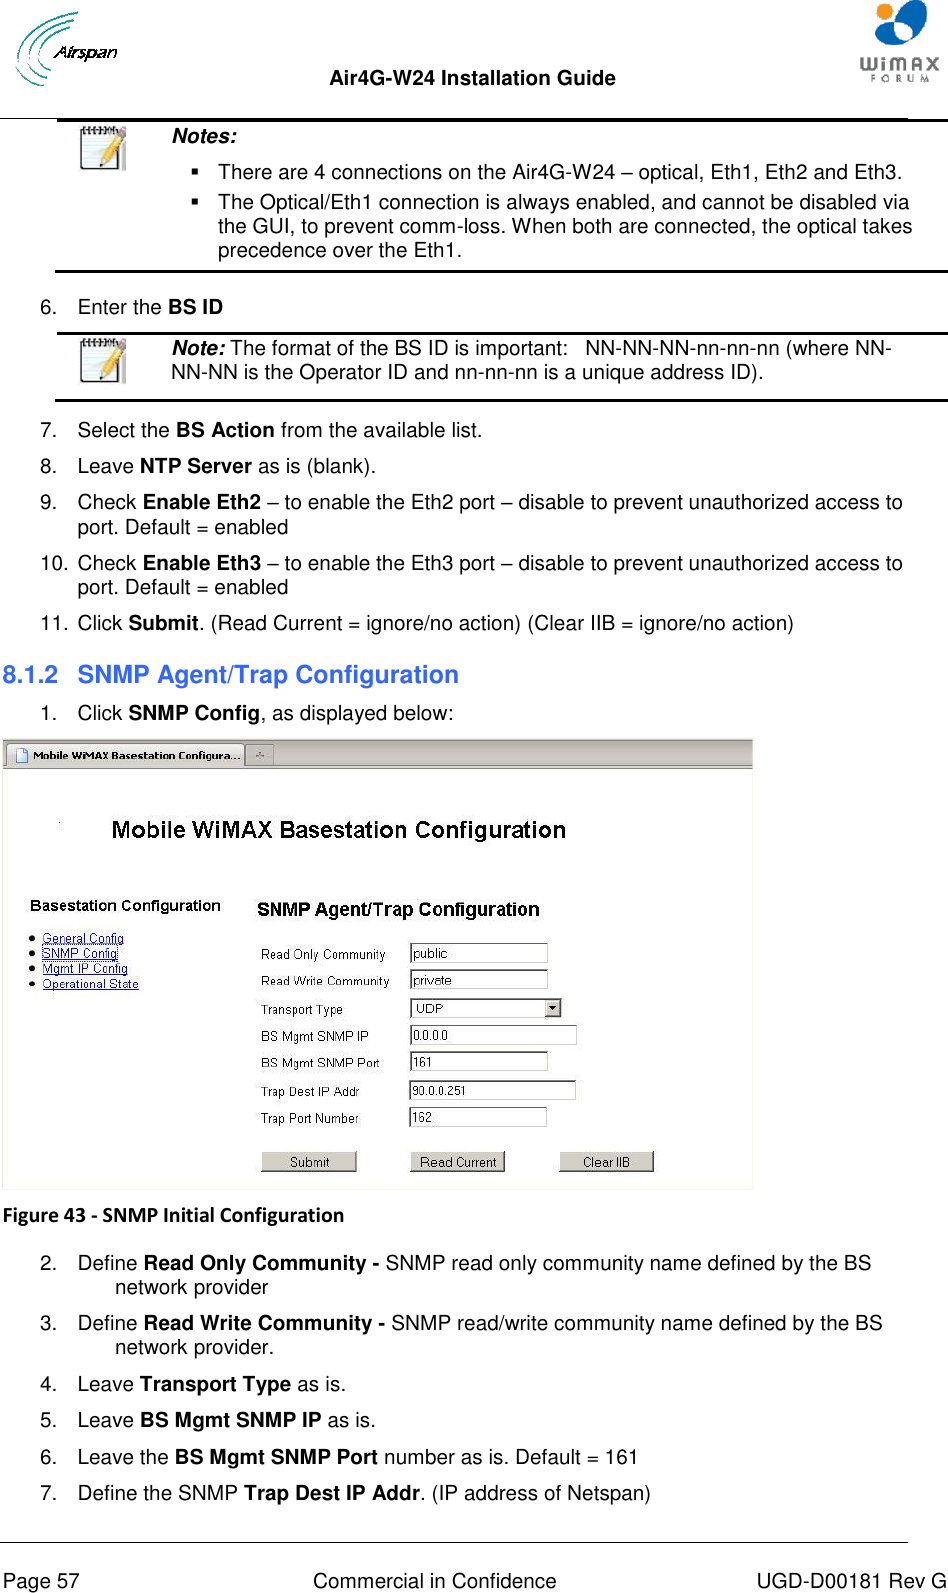  Air4G-W24 Installation Guide       Page 57  Commercial in Confidence  UGD-D00181 Rev G   Notes:    There are 4 connections on the Air4G-W24 – optical, Eth1, Eth2 and Eth3.   The Optical/Eth1 connection is always enabled, and cannot be disabled via the GUI, to prevent comm-loss. When both are connected, the optical takes precedence over the Eth1.  6.  Enter the BS ID   Note: The format of the BS ID is important:   NN-NN-NN-nn-nn-nn (where NN-NN-NN is the Operator ID and nn-nn-nn is a unique address ID).  7.  Select the BS Action from the available list. 8.  Leave NTP Server as is (blank). 9.  Check Enable Eth2 – to enable the Eth2 port – disable to prevent unauthorized access to port. Default = enabled 10. Check Enable Eth3 – to enable the Eth3 port – disable to prevent unauthorized access to port. Default = enabled 11. Click Submit. (Read Current = ignore/no action) (Clear IIB = ignore/no action) 8.1.2  SNMP Agent/Trap Configuration 1.  Click SNMP Config, as displayed below:  Figure 43 - SNMP Initial Configuration  2.  Define Read Only Community - SNMP read only community name defined by the BS network provider 3.  Define Read Write Community - SNMP read/write community name defined by the BS network provider. 4.  Leave Transport Type as is. 5.  Leave BS Mgmt SNMP IP as is. 6.  Leave the BS Mgmt SNMP Port number as is. Default = 161 7.  Define the SNMP Trap Dest IP Addr. (IP address of Netspan) 